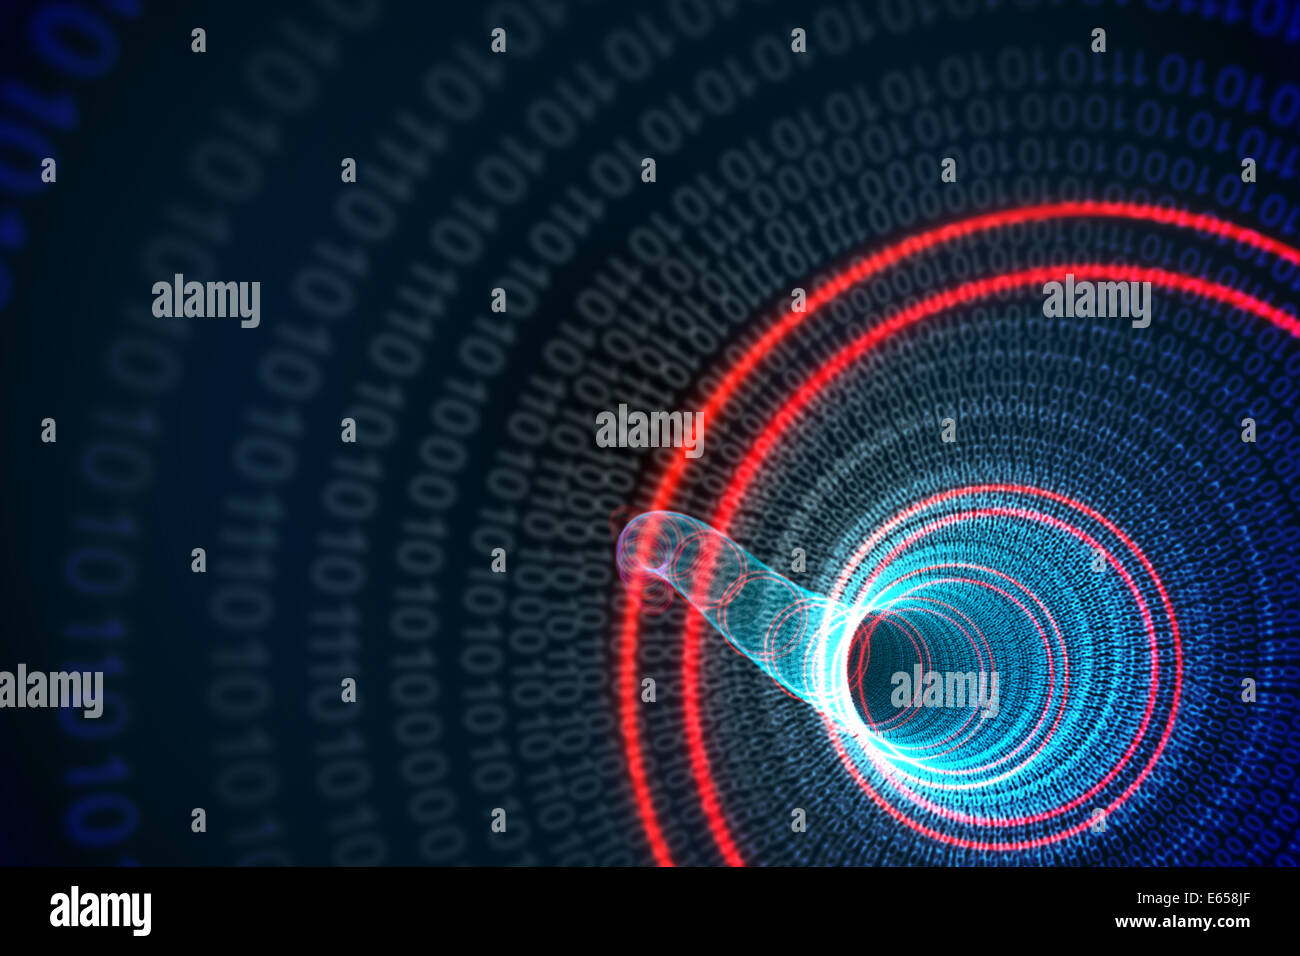 Binary spiral with red glow Stock Photo